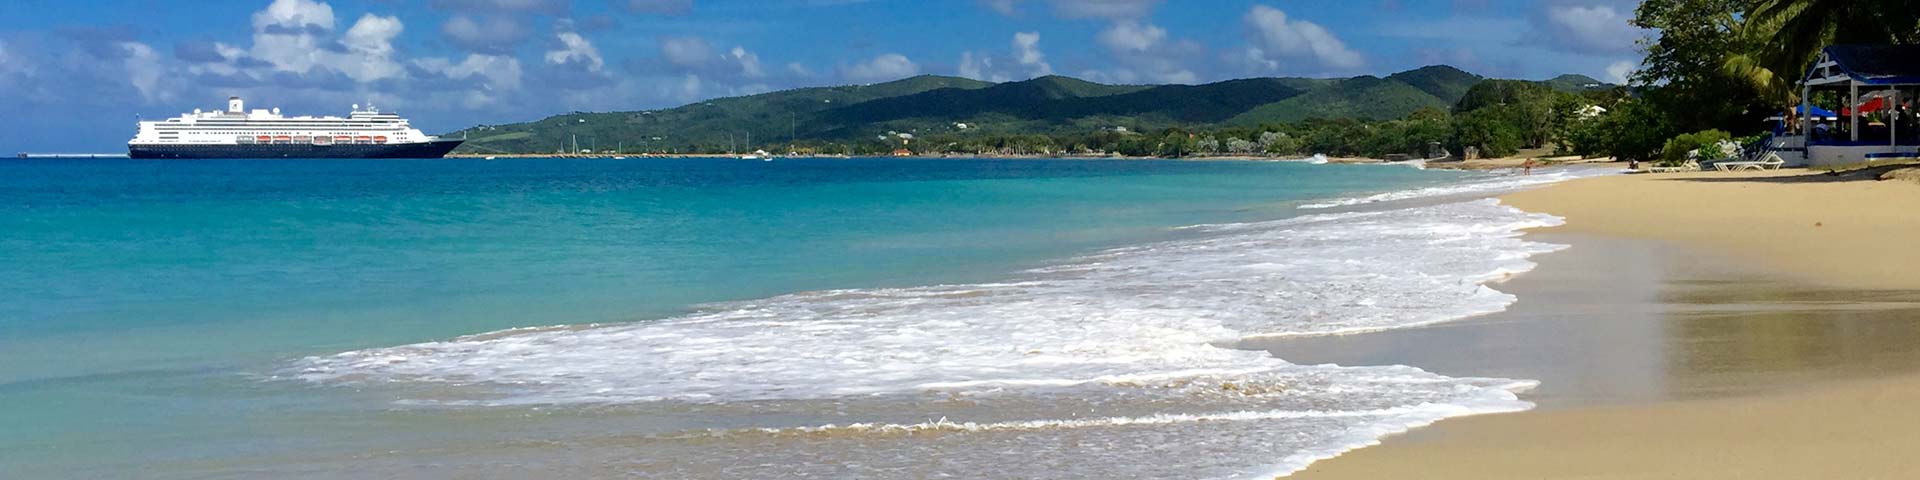 Pricing Affordable Caribbean Vacation Cottages By The Sea